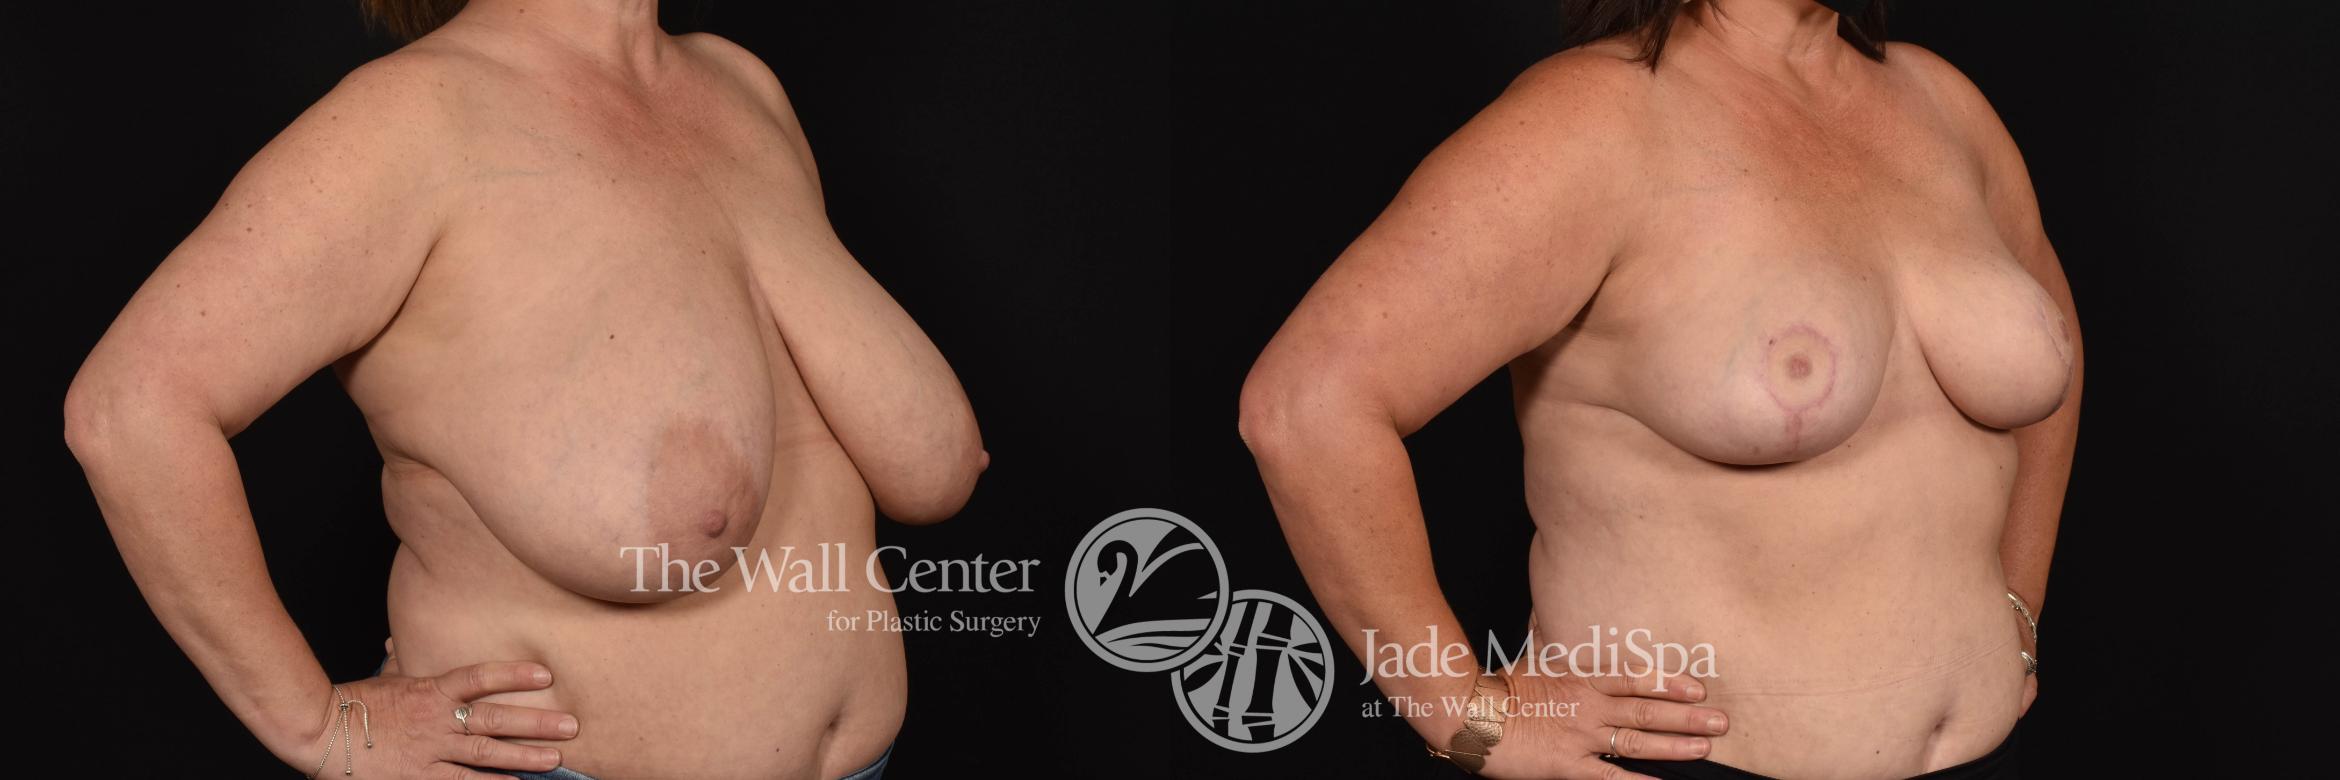 Breast Reduction Right Oblique Photo, Shreveport, Louisiana, The Wall Center for Plastic Surgery, Case 853